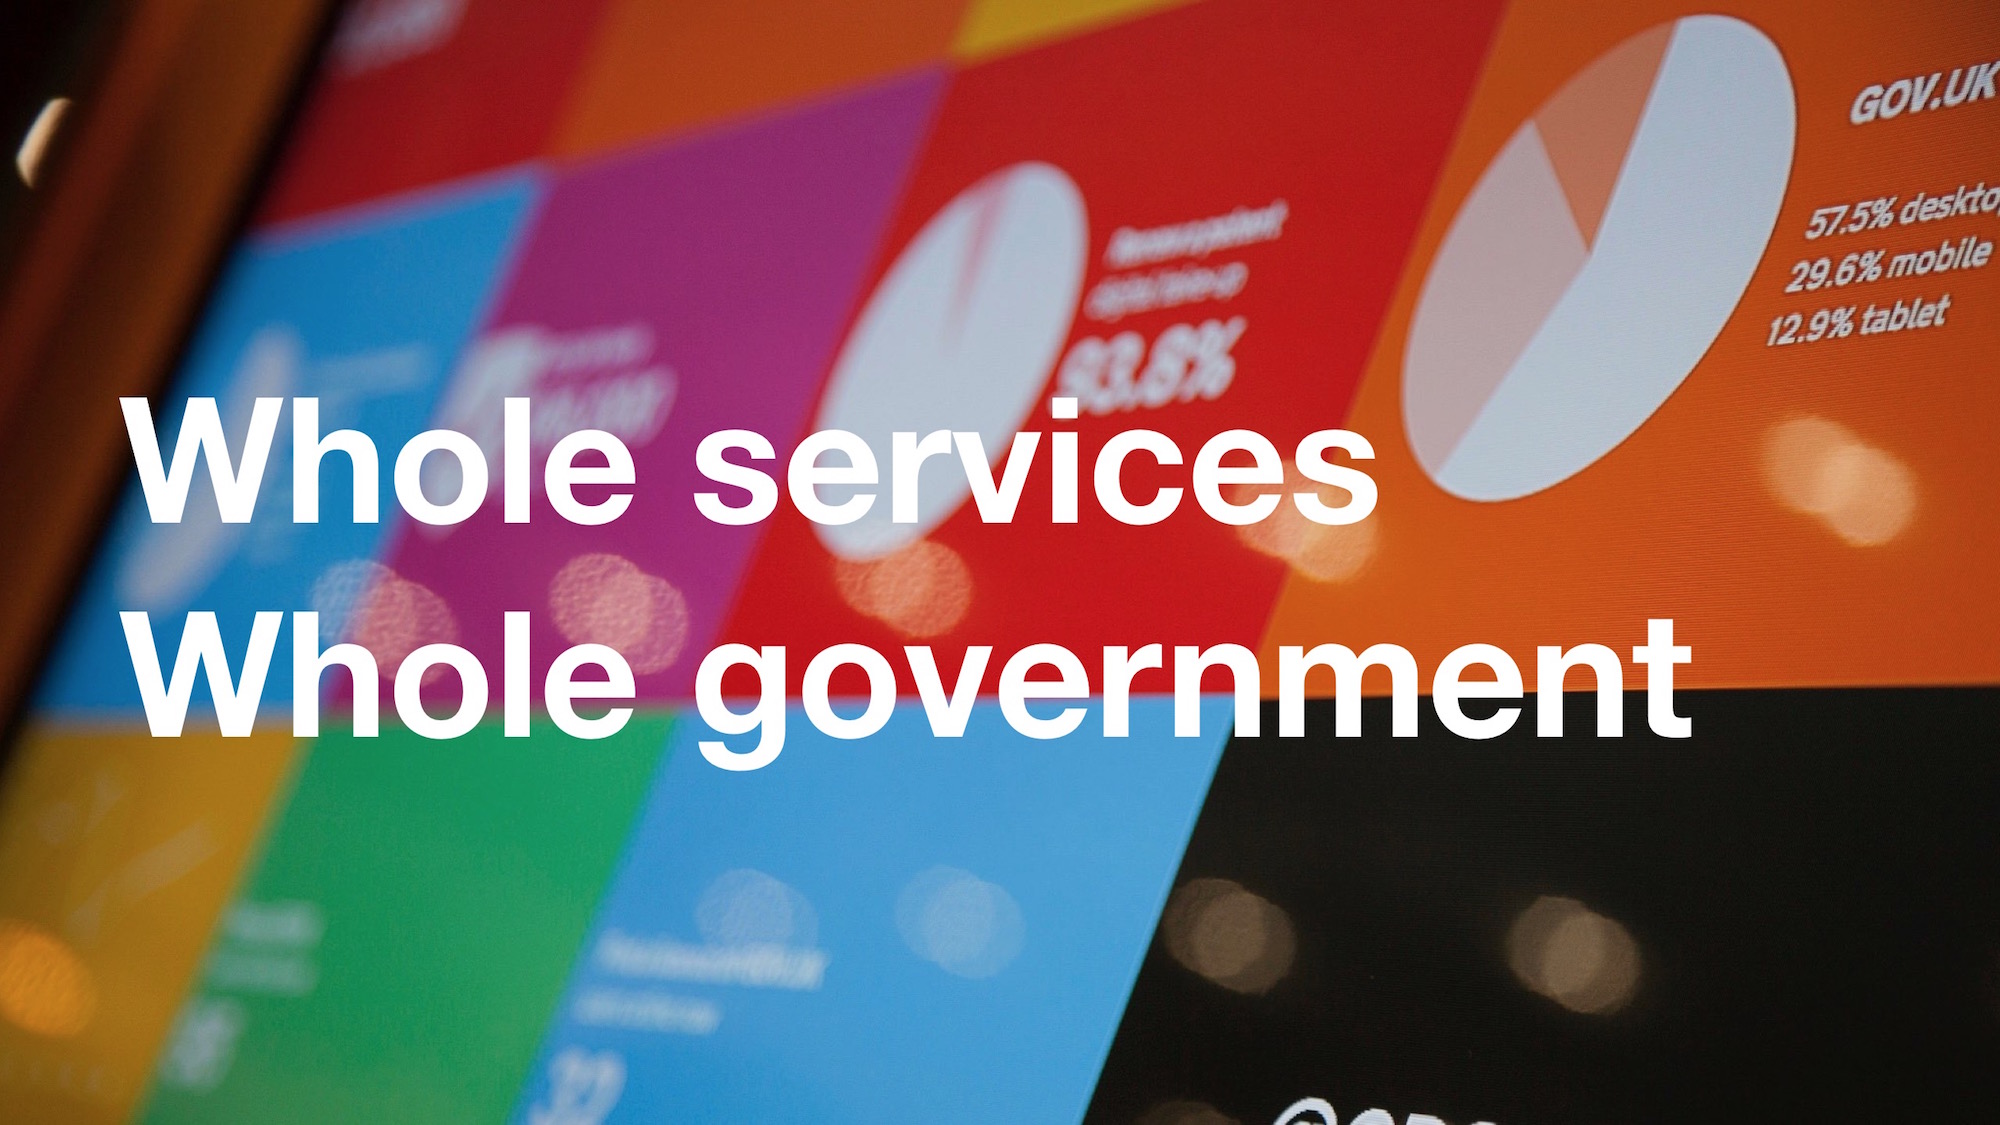 Photo of dashboards overlaid with the text "whole services, whole government"